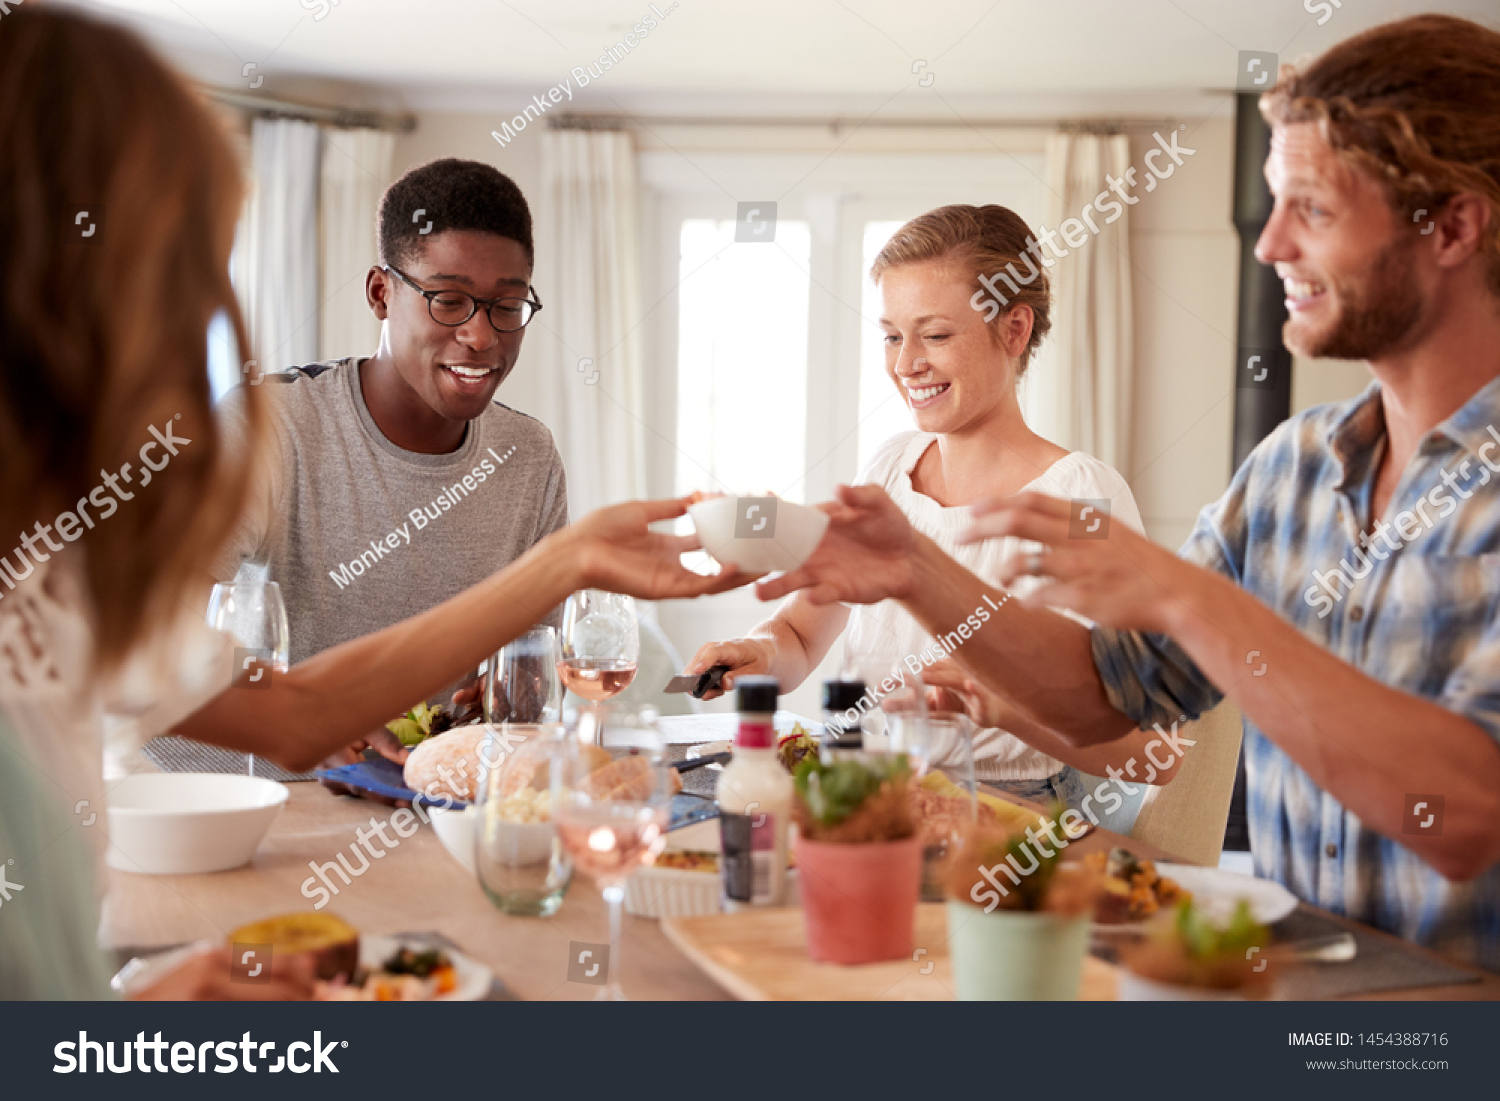 Young adult friends passing a dish across the dinner table at lunch, close up #1454388716